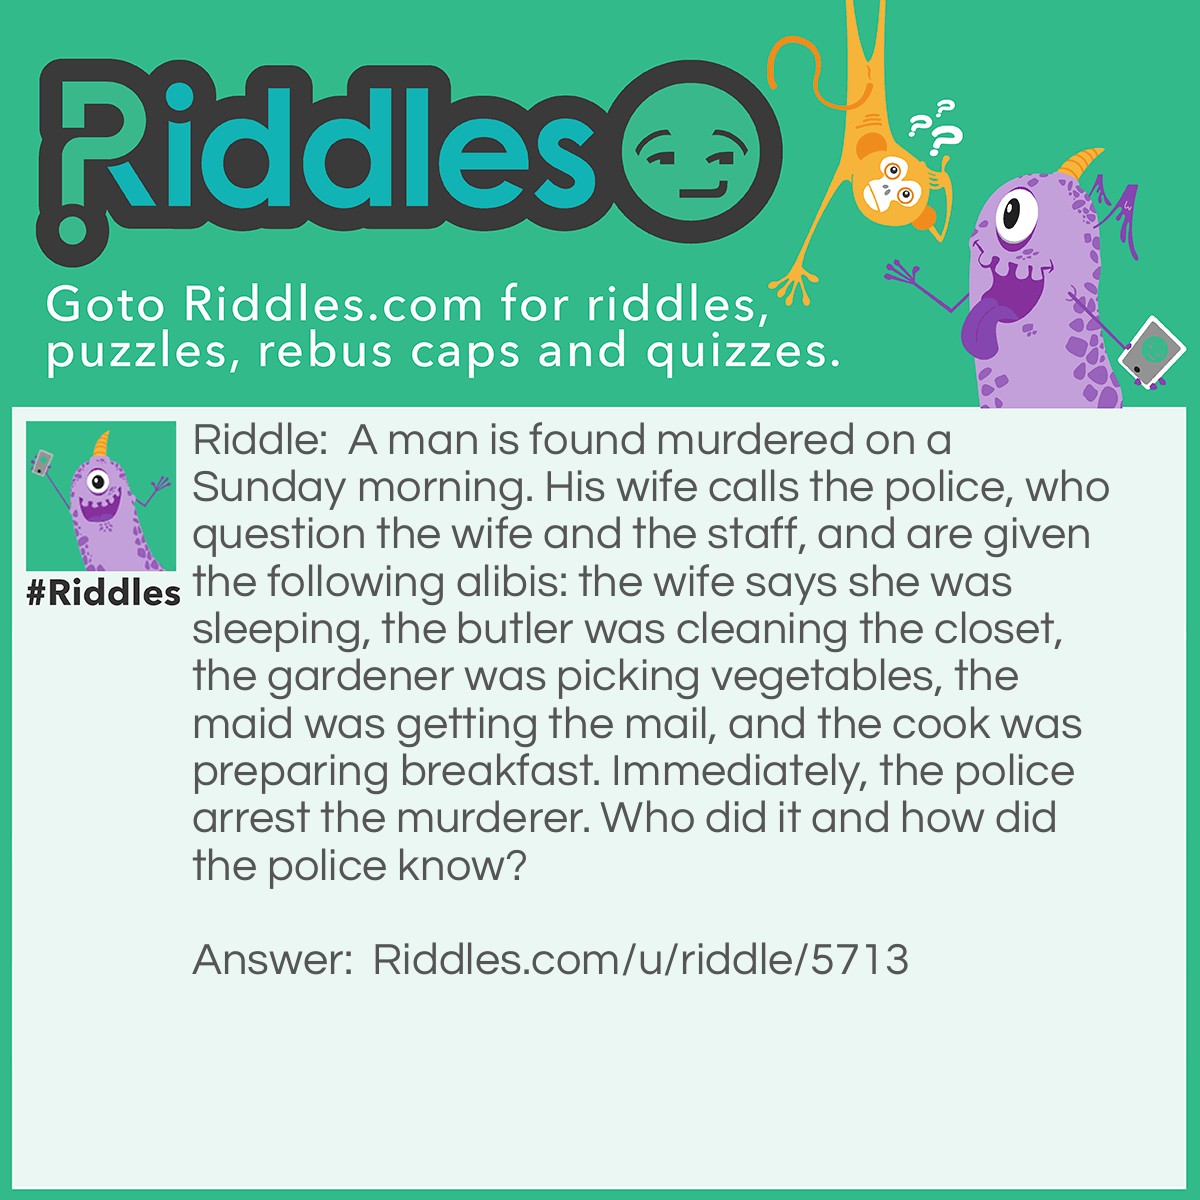 Riddle: A man is found murdered on a Sunday morning. His wife calls the police, who question the wife and the staff, and are given the following alibis: the wife says she was sleeping, the butler was cleaning the closet, the gardener was picking vegetables, the maid was getting the mail, and the cook was preparing breakfast. Immediately, the police arrest the murderer. Who did it and how did the police know? Answer: The Maid, There is no mail on Sundays.